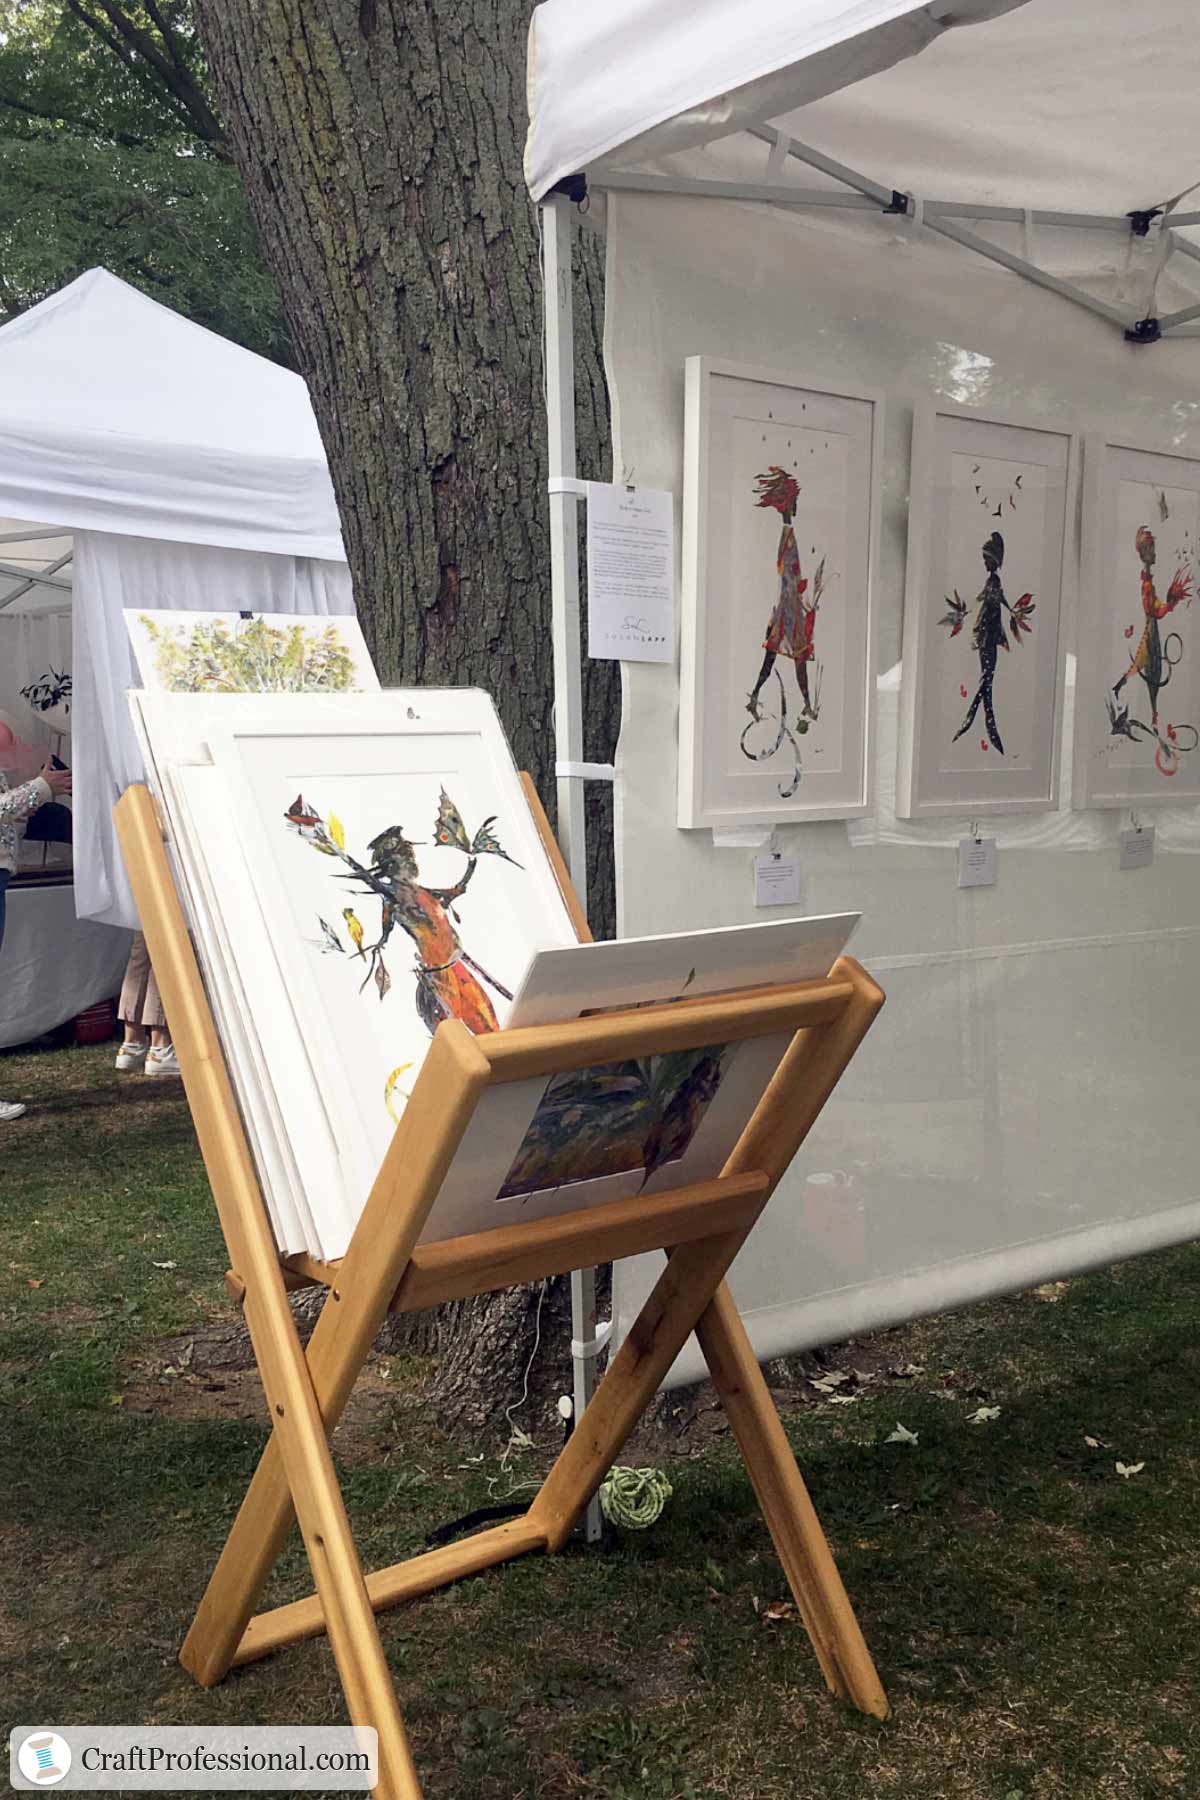 10 Art Show Display Ideas to Show Paintings & Prints in a Craft Booth